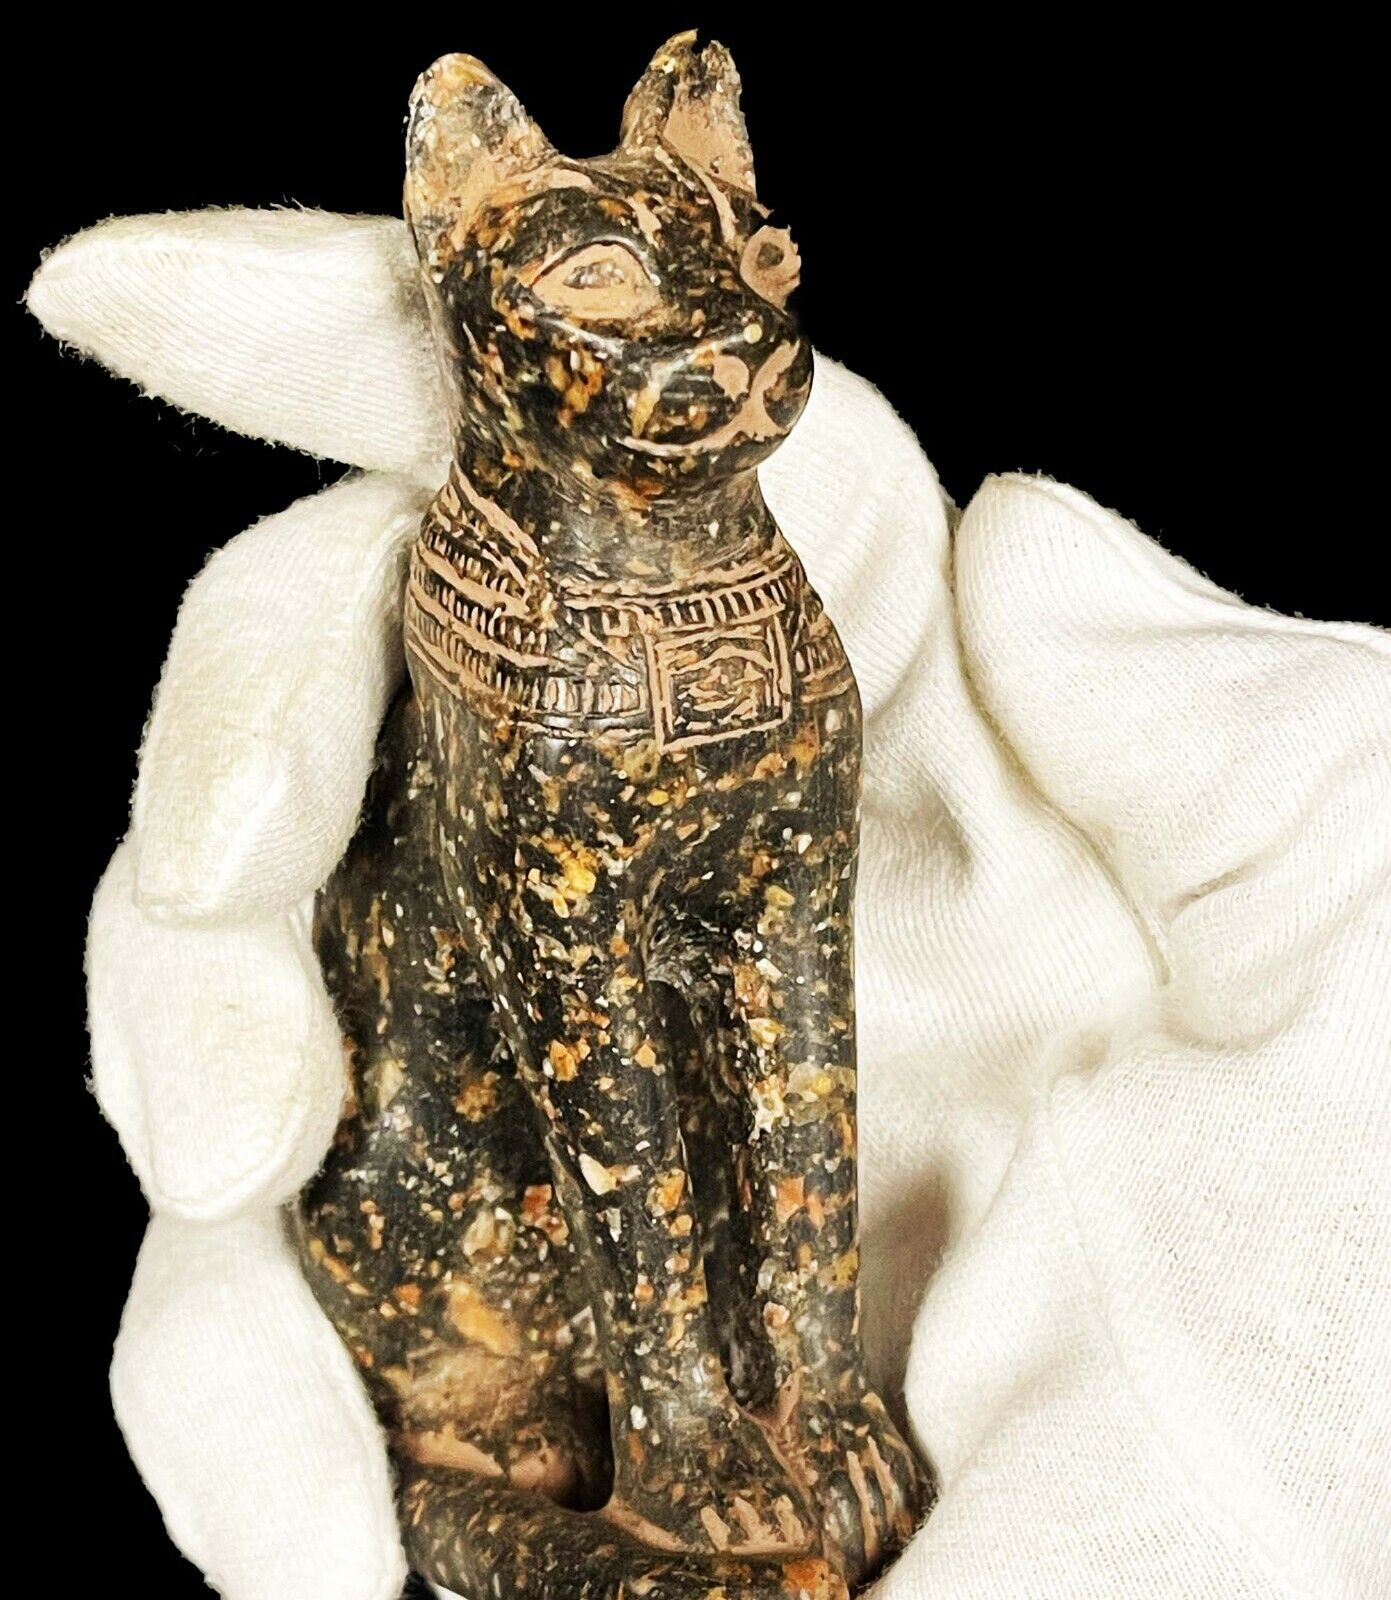 Small Unique Bastet The Ancient Egyptian goddess of protection